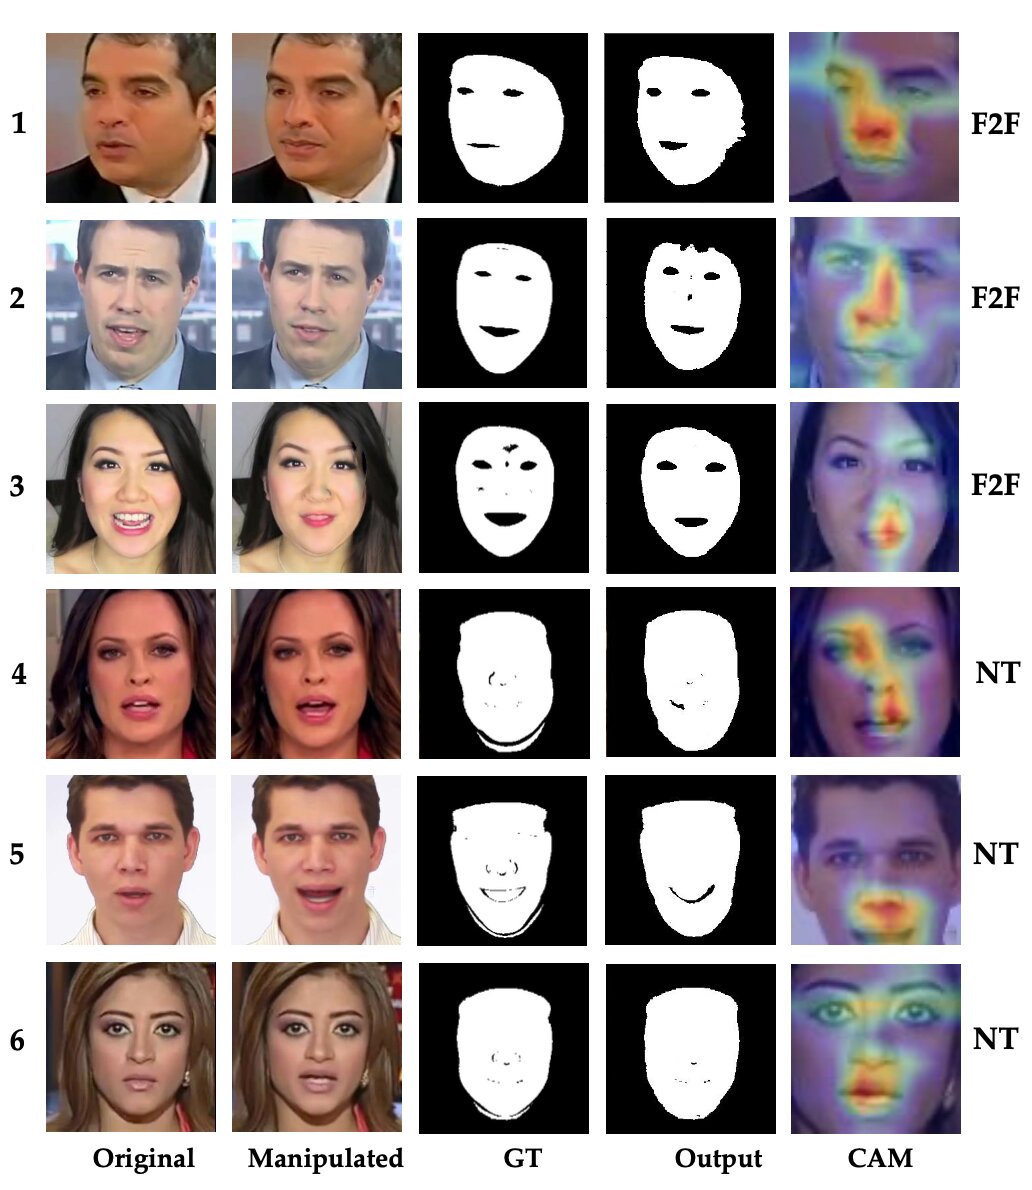 #New method detects deepfake videos with up to 99% accuracy